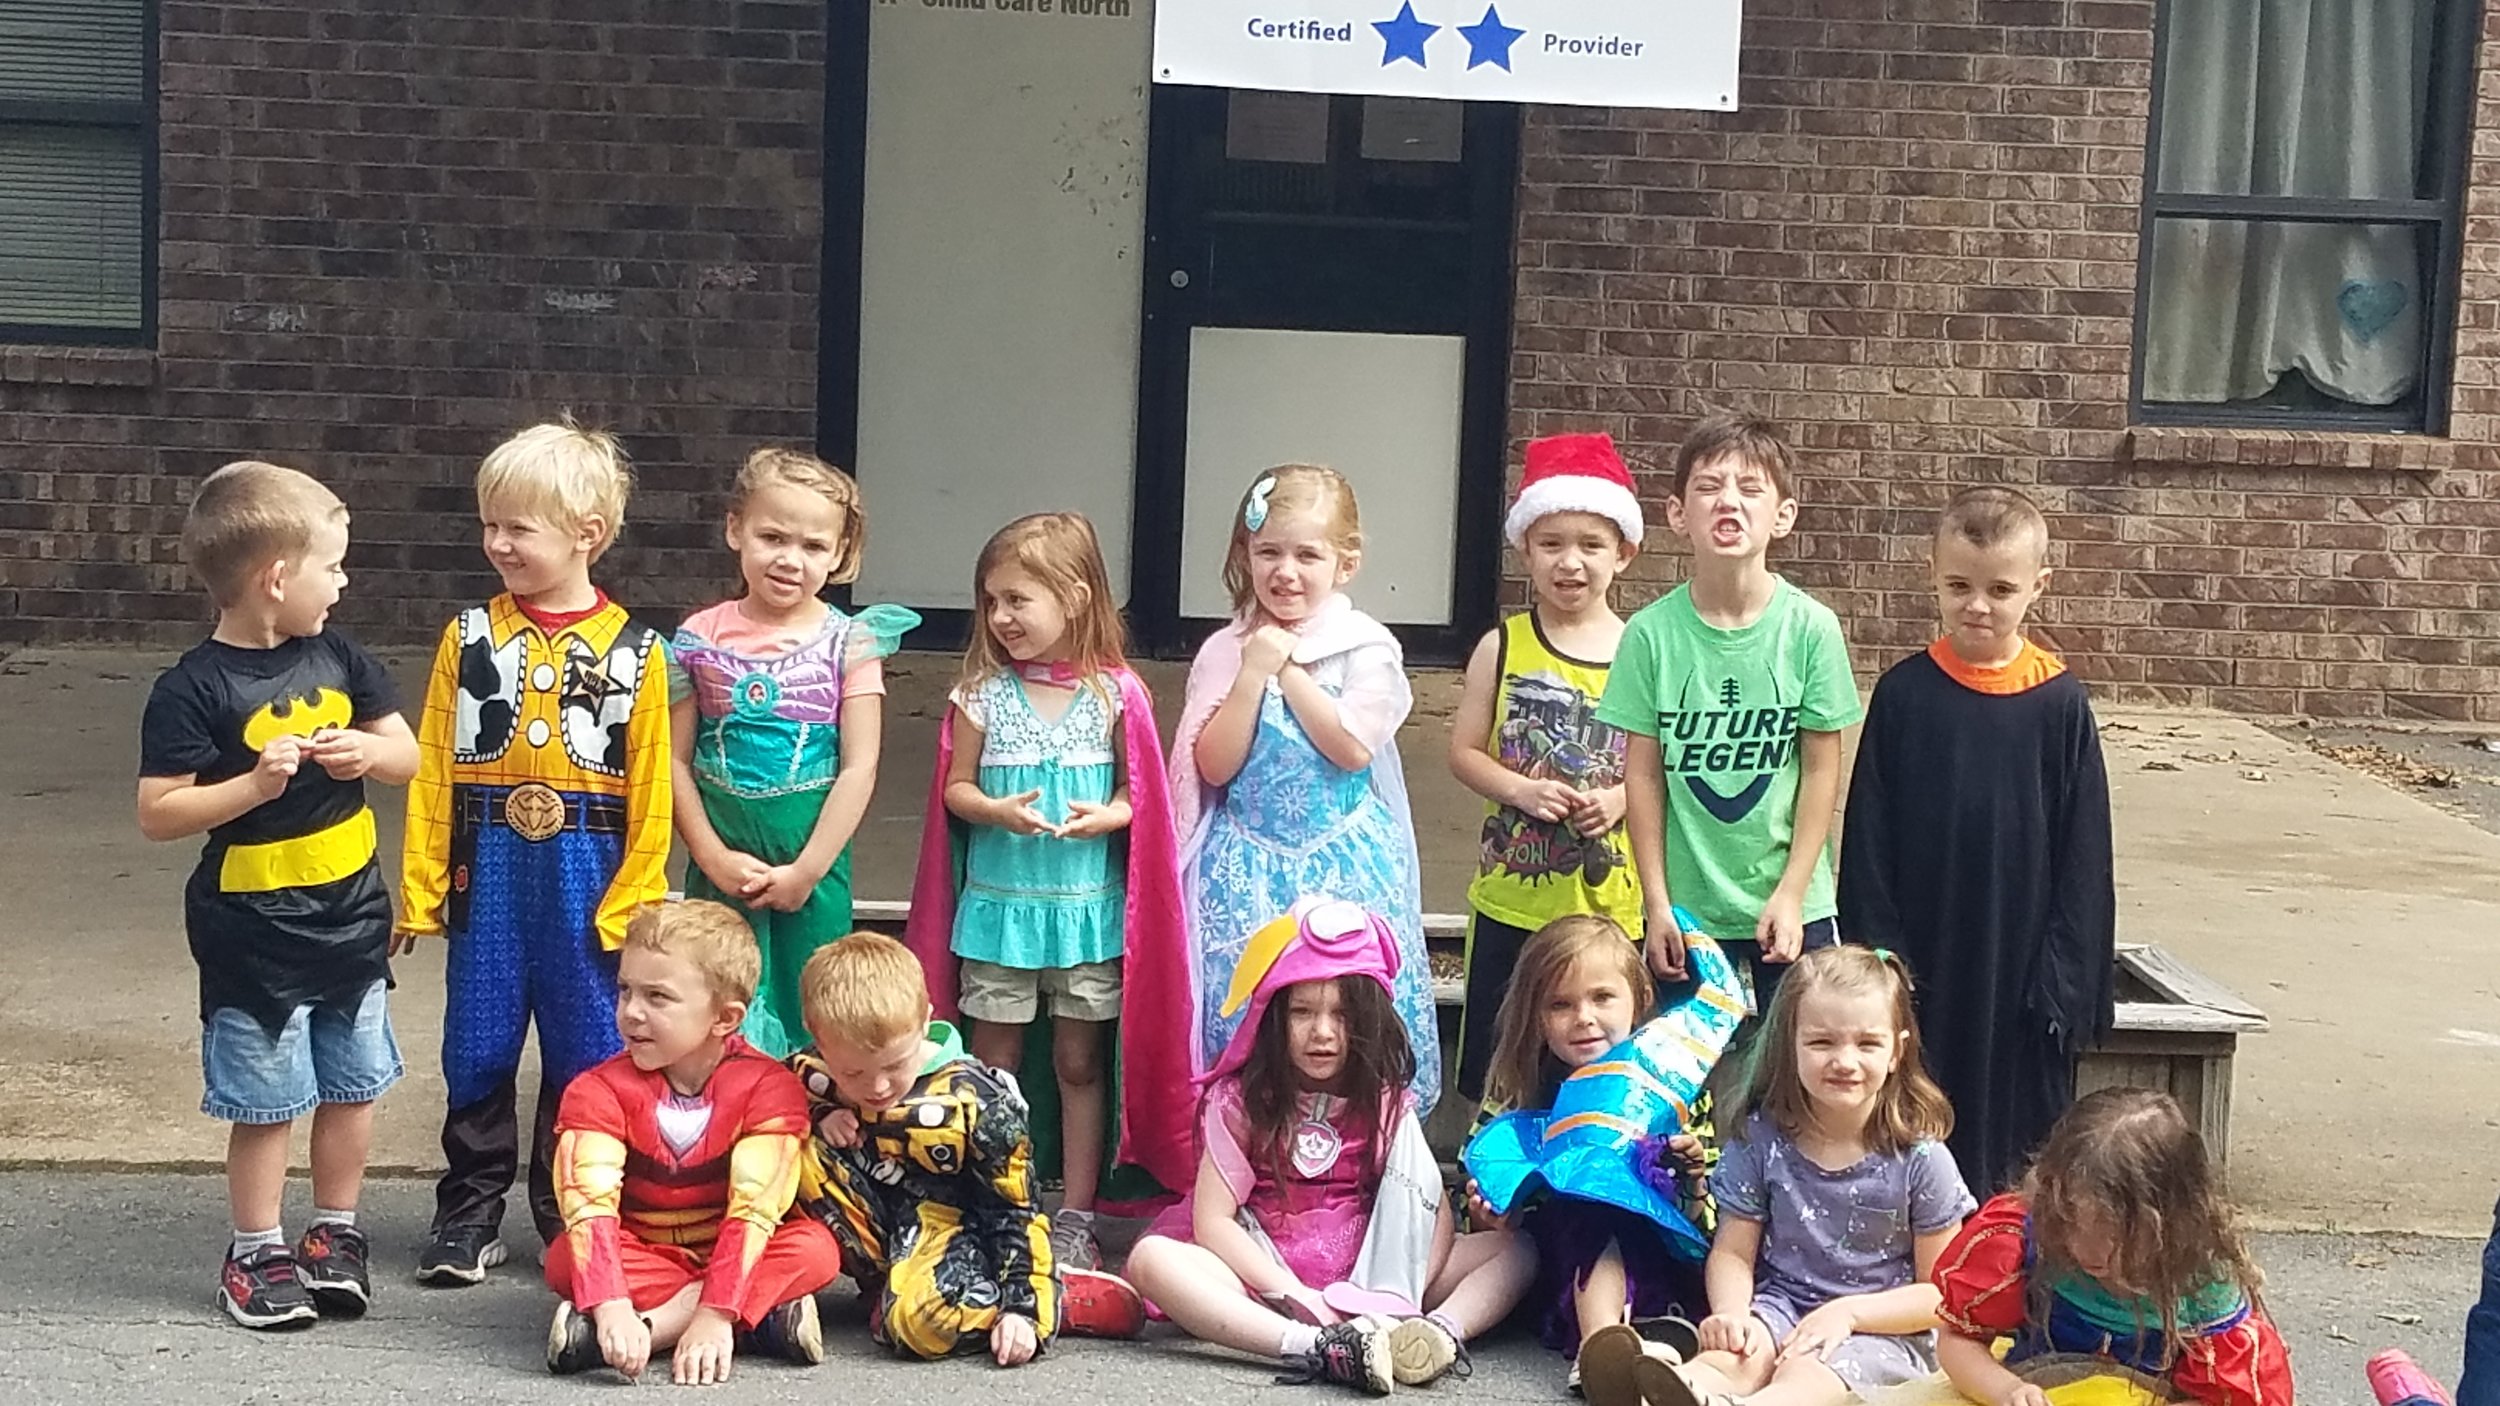 Cabot East Justice Childcare having fun costume dress-up day 3.jpg